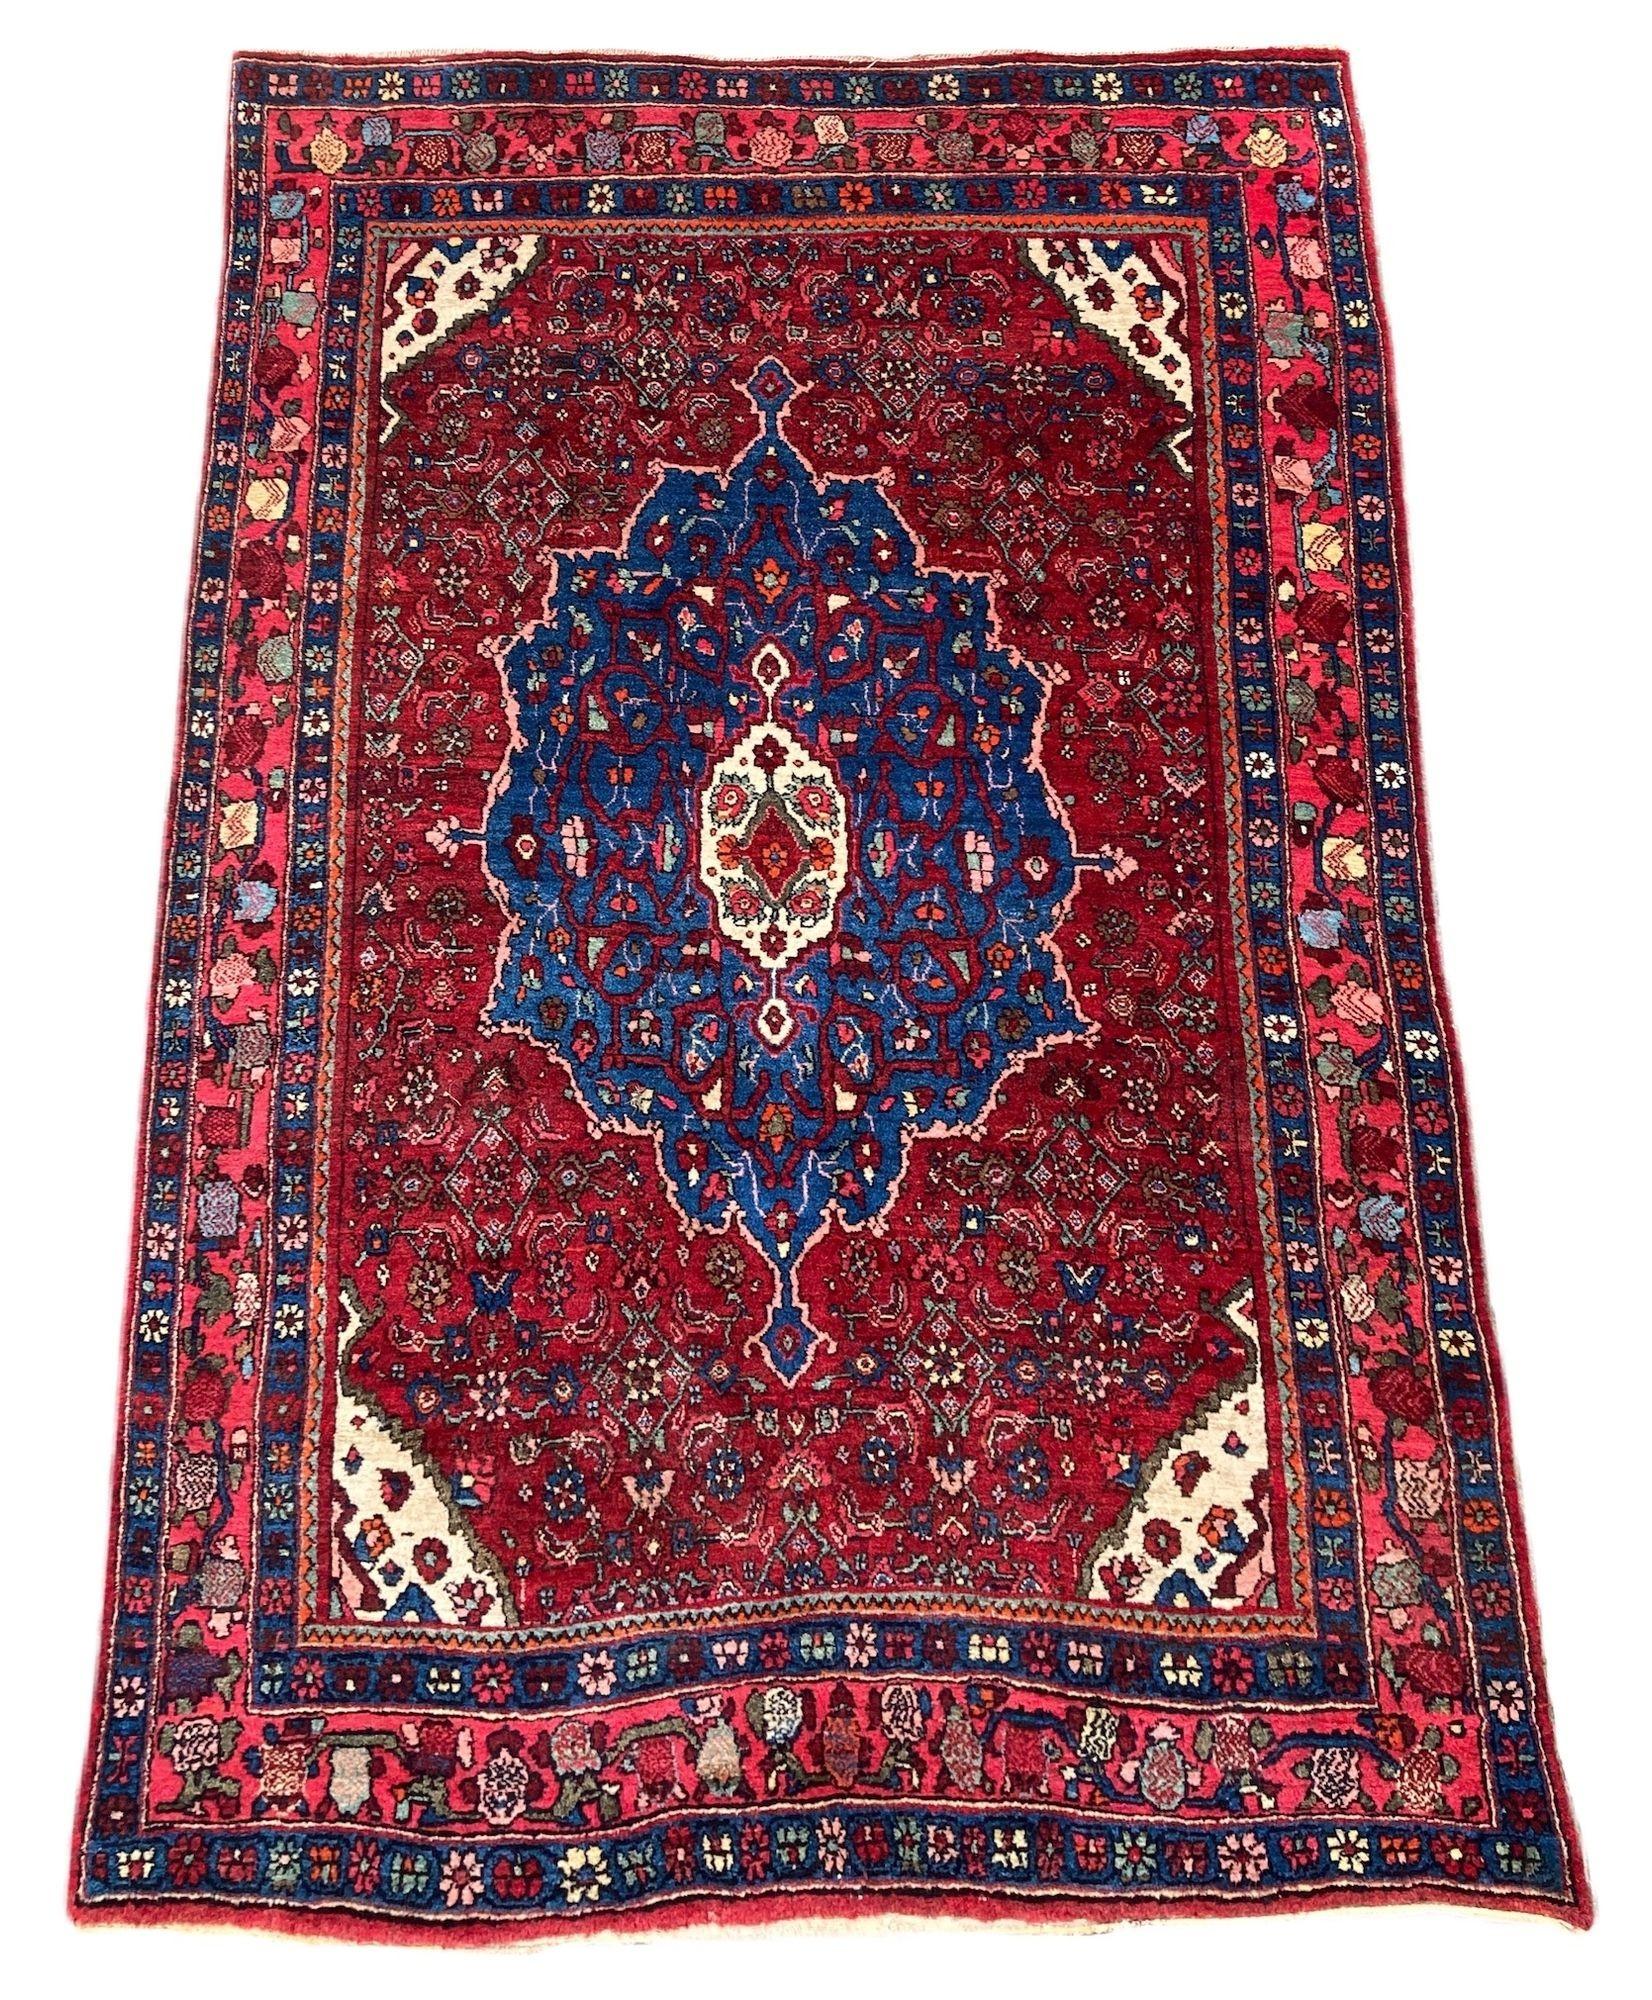 A wonderful antique Bidjar rug, hand woven circa 1920. The design features a central indigo medallion on a traditional Herati design red field. Finely woven with lovely wool quality and great secondary colours.
Size: 1.61m x 1.12m (5ft 4in x 3ft